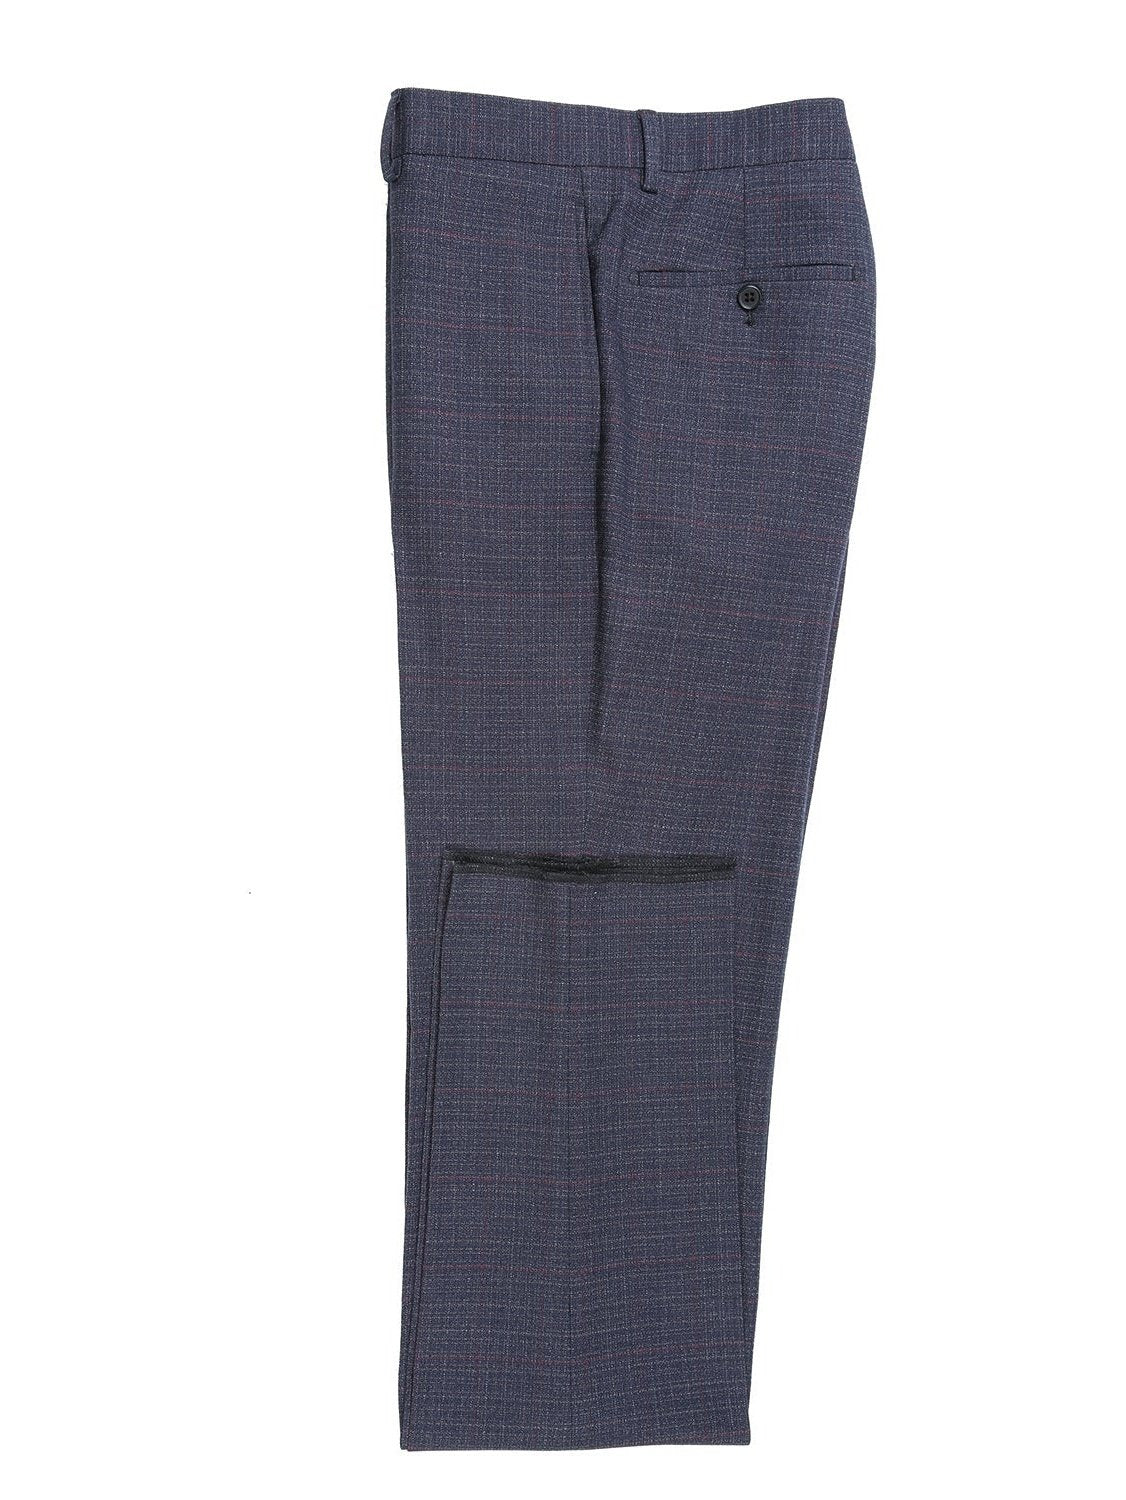 English Laundry Slim Fit Two button Gray Navy Check Peak Lapel Suit